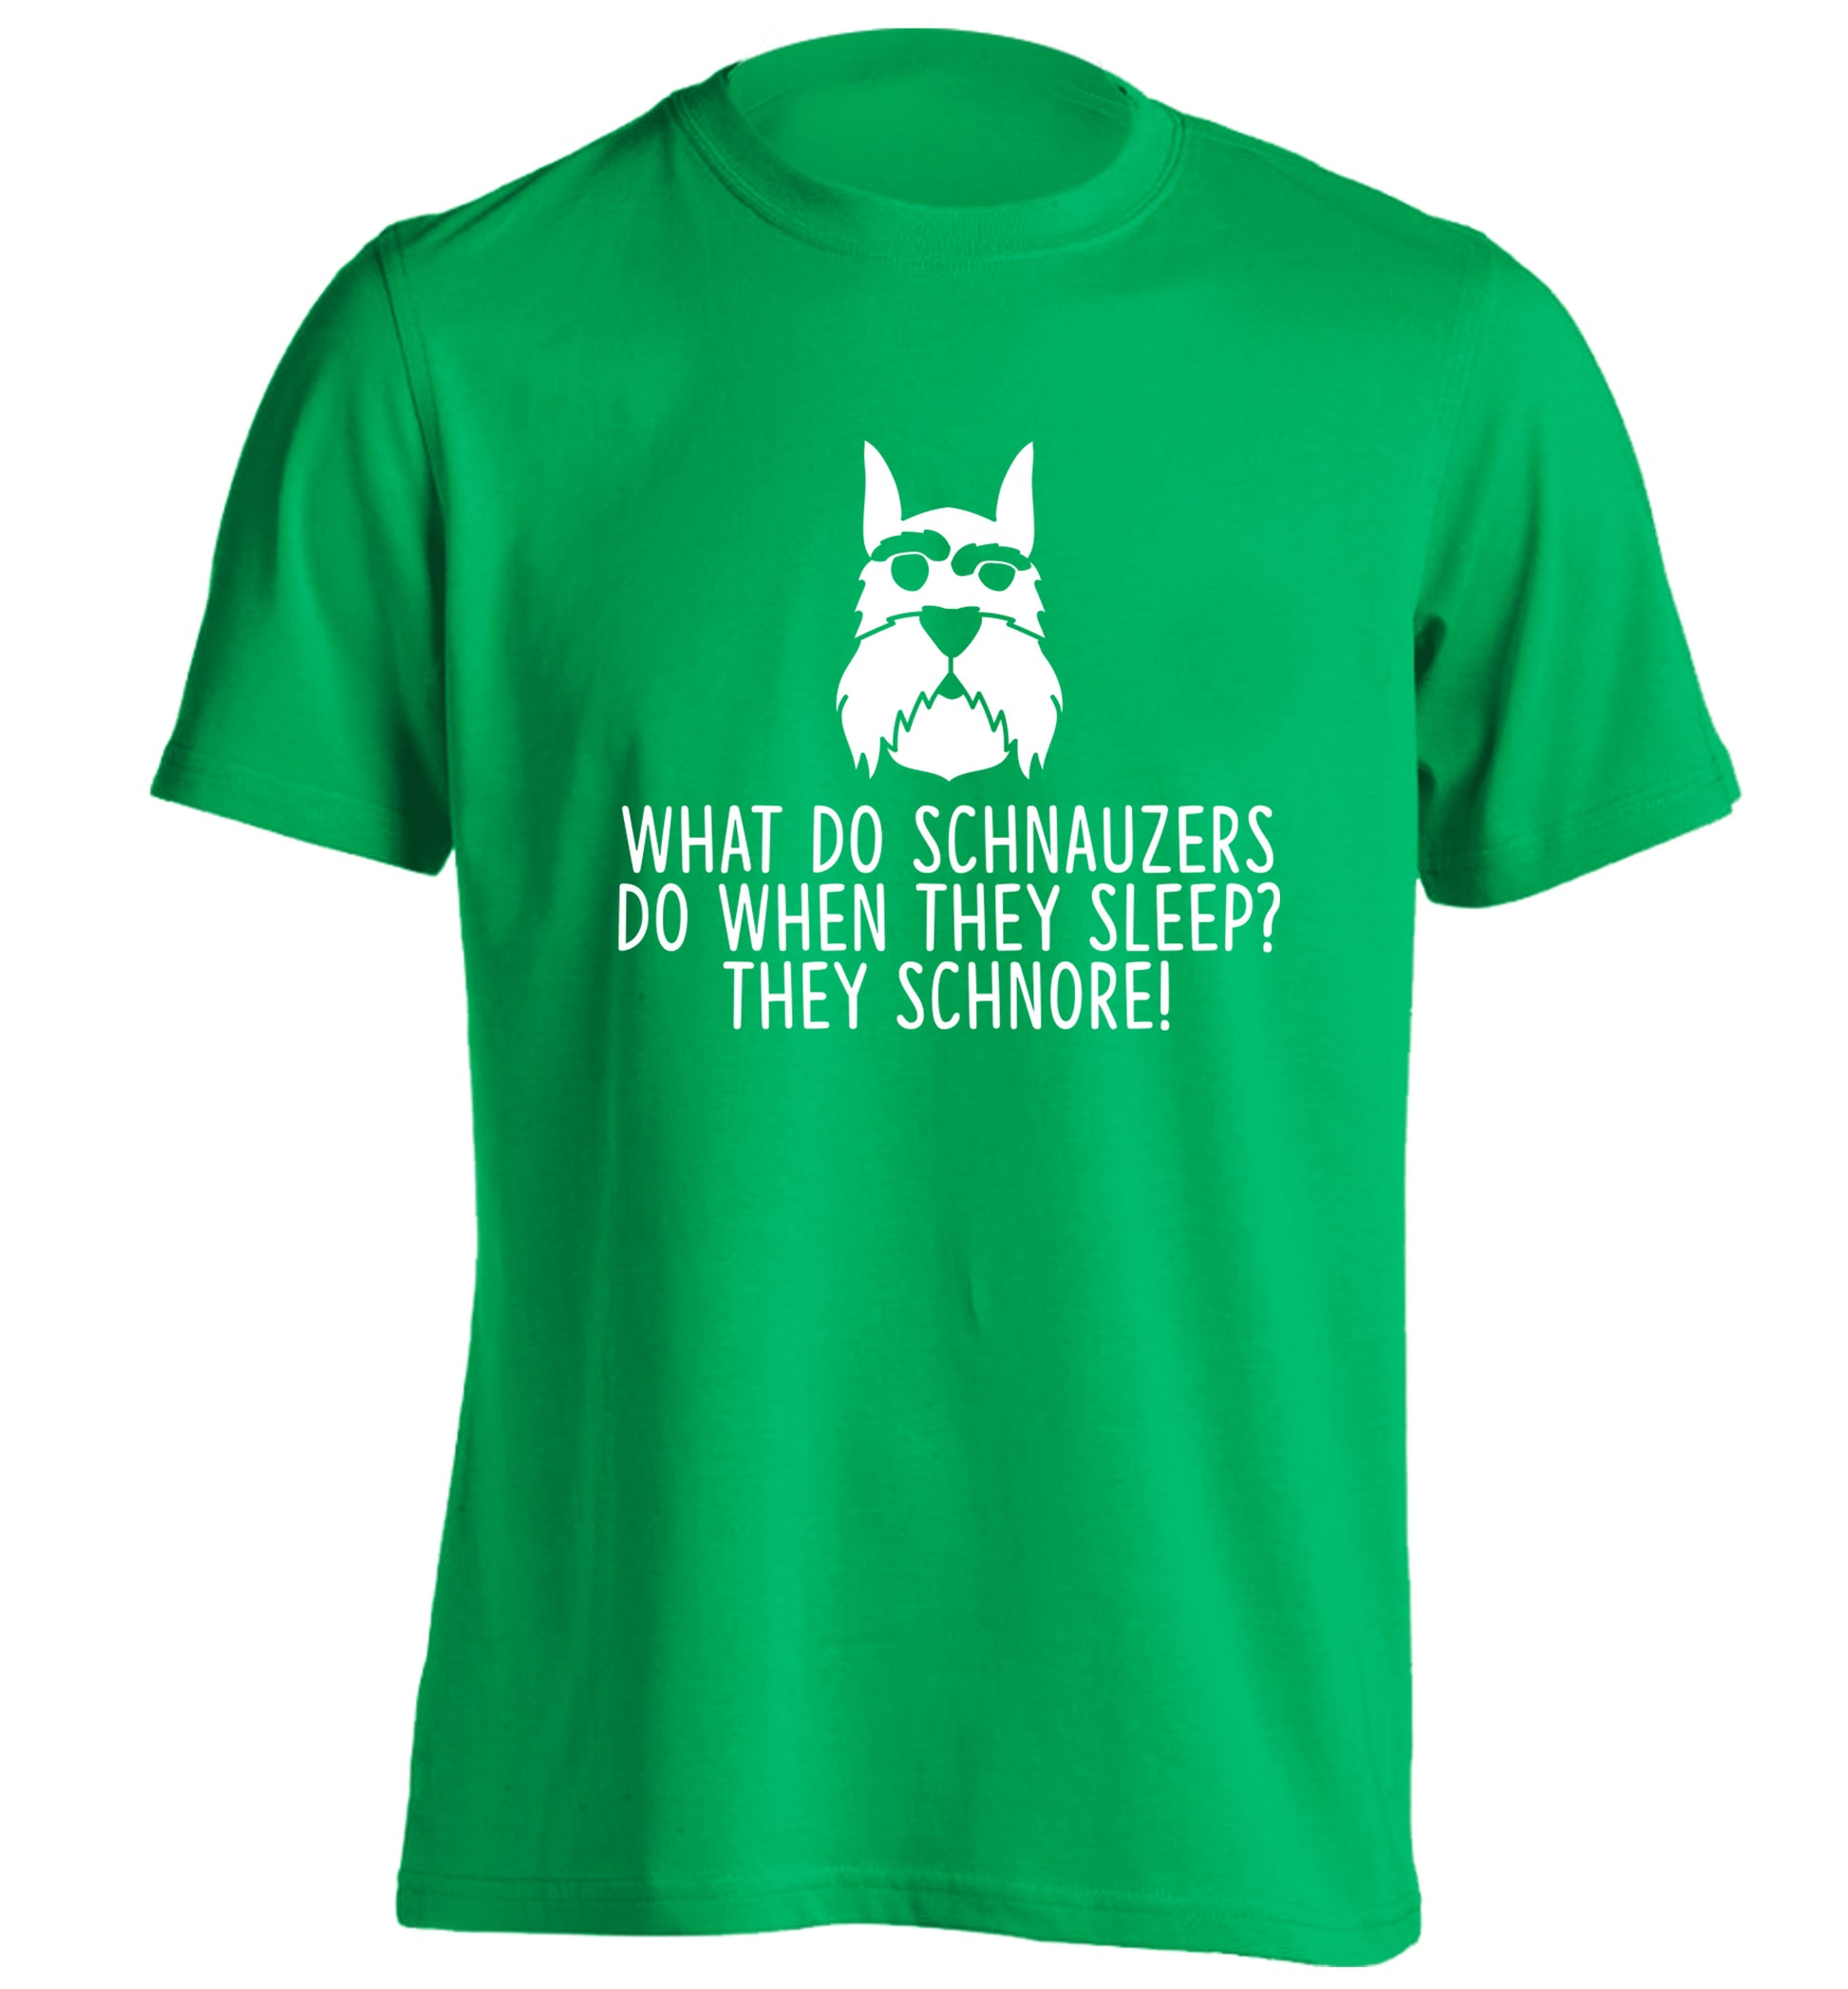 What do schnauzers do when they sleep? Schnore! adults unisex green Tshirt 2XL